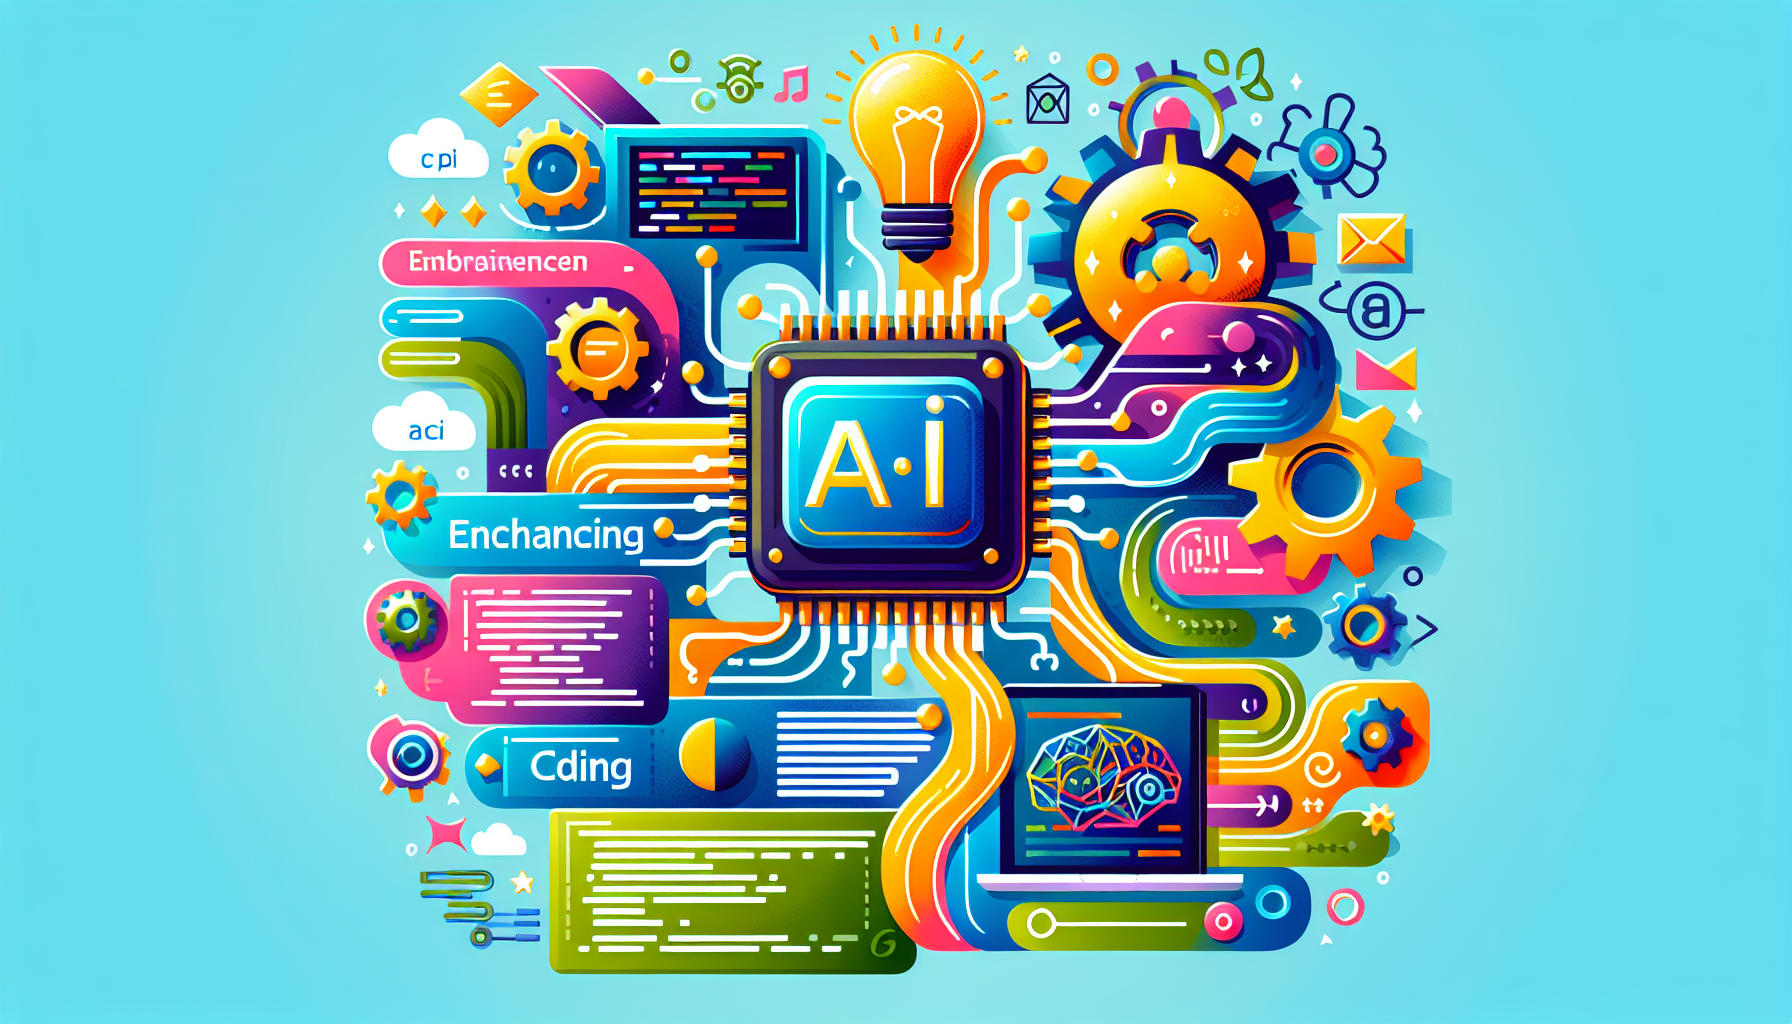 A modern and colorful illustration that depicts various aspects of enhancing a script with artificial intelligence for beginners. Include a CPU symbolizing the processor of AI, widgets that show coding or script, some gears symbolizing the data processing, and creative ways to show the process of improvement, all blended into an engaging design. The design should skilfully use a variety of bright, vibrant colors.